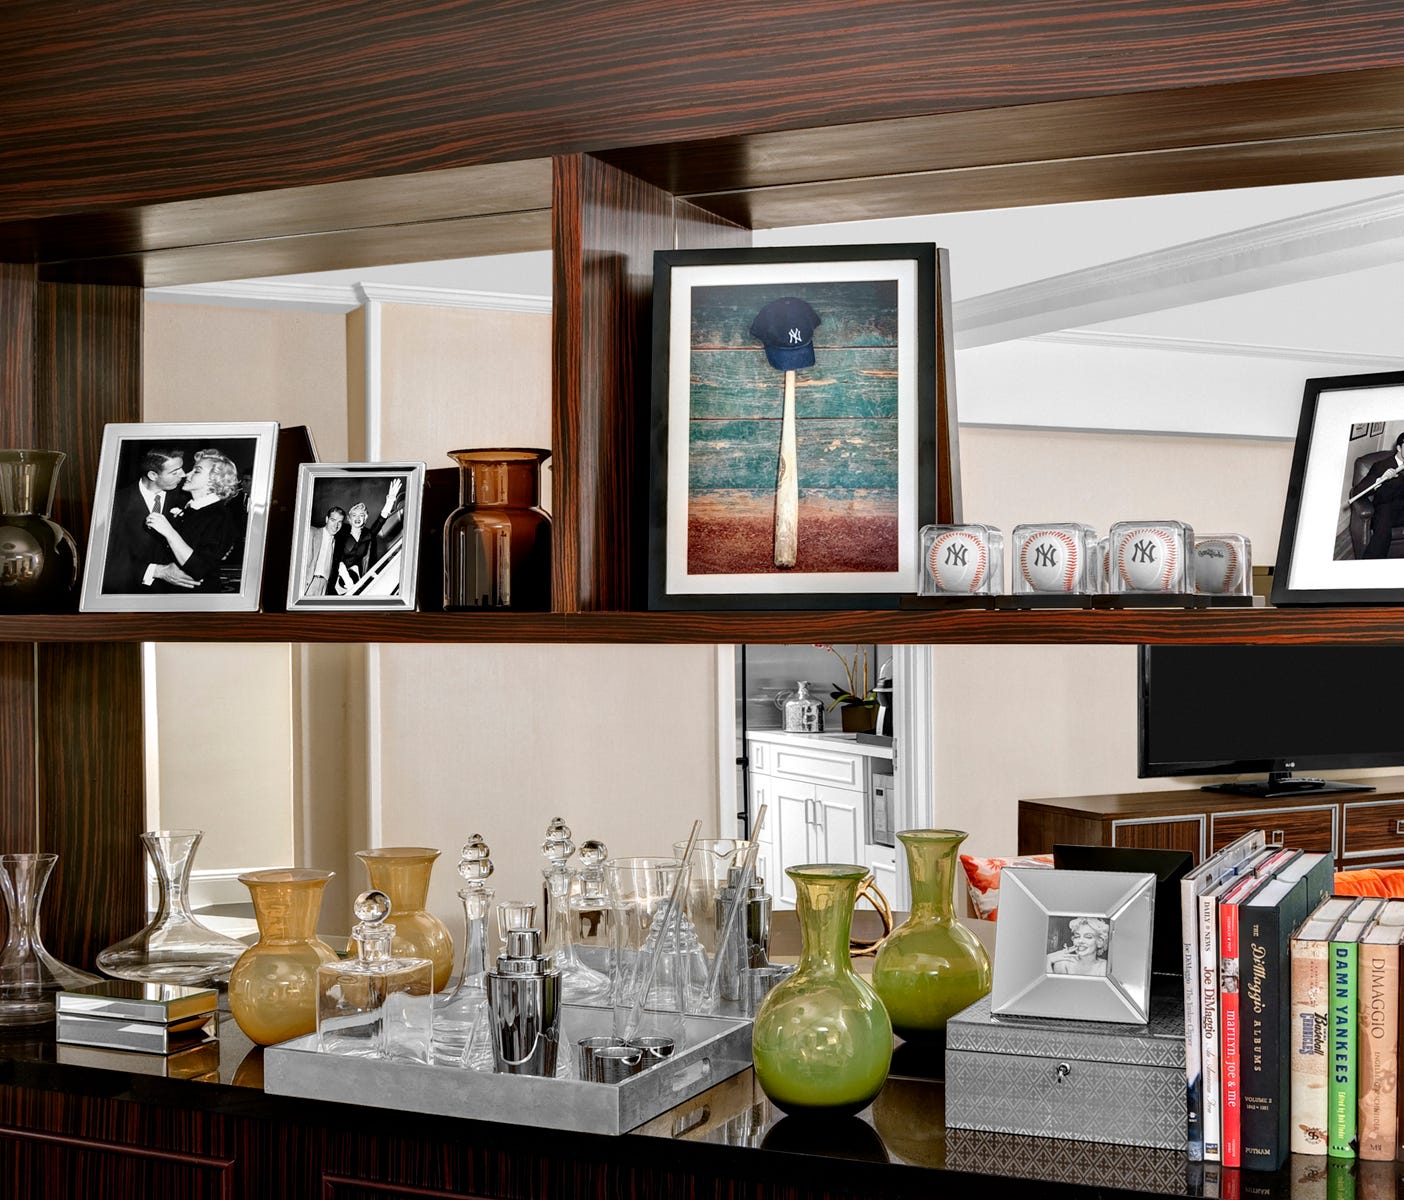 The Centerfield Suite at the Lexington New York has baseball memorabilia and photos of Joe DiMaggio and Marilyn Monroe, who lived there.